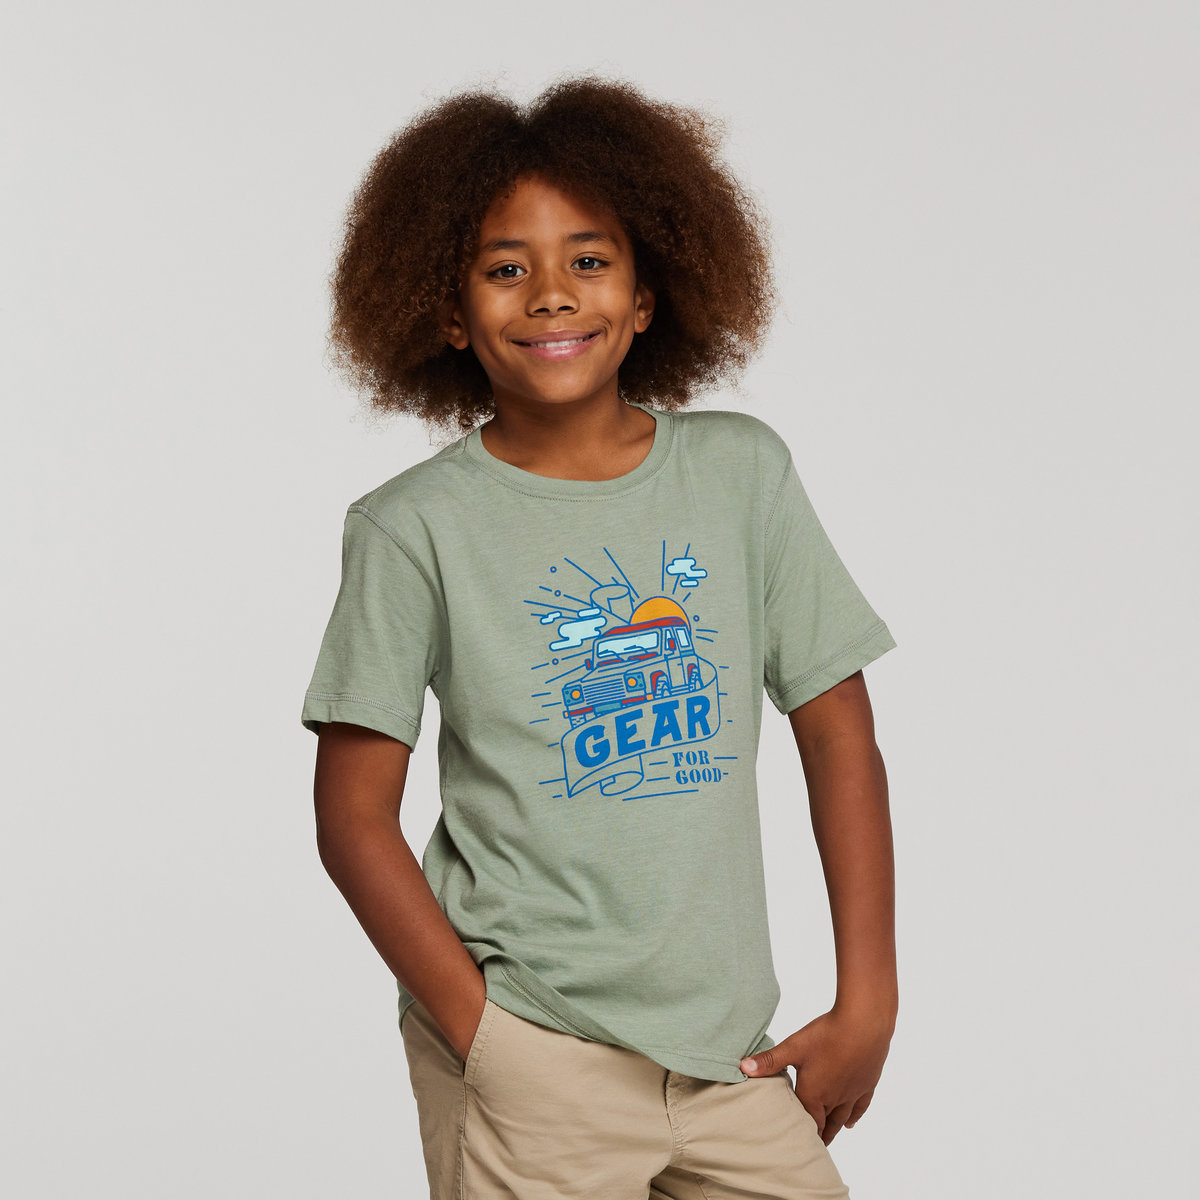 Are We There Yet T-Shirt - Kids' – Cotopaxi